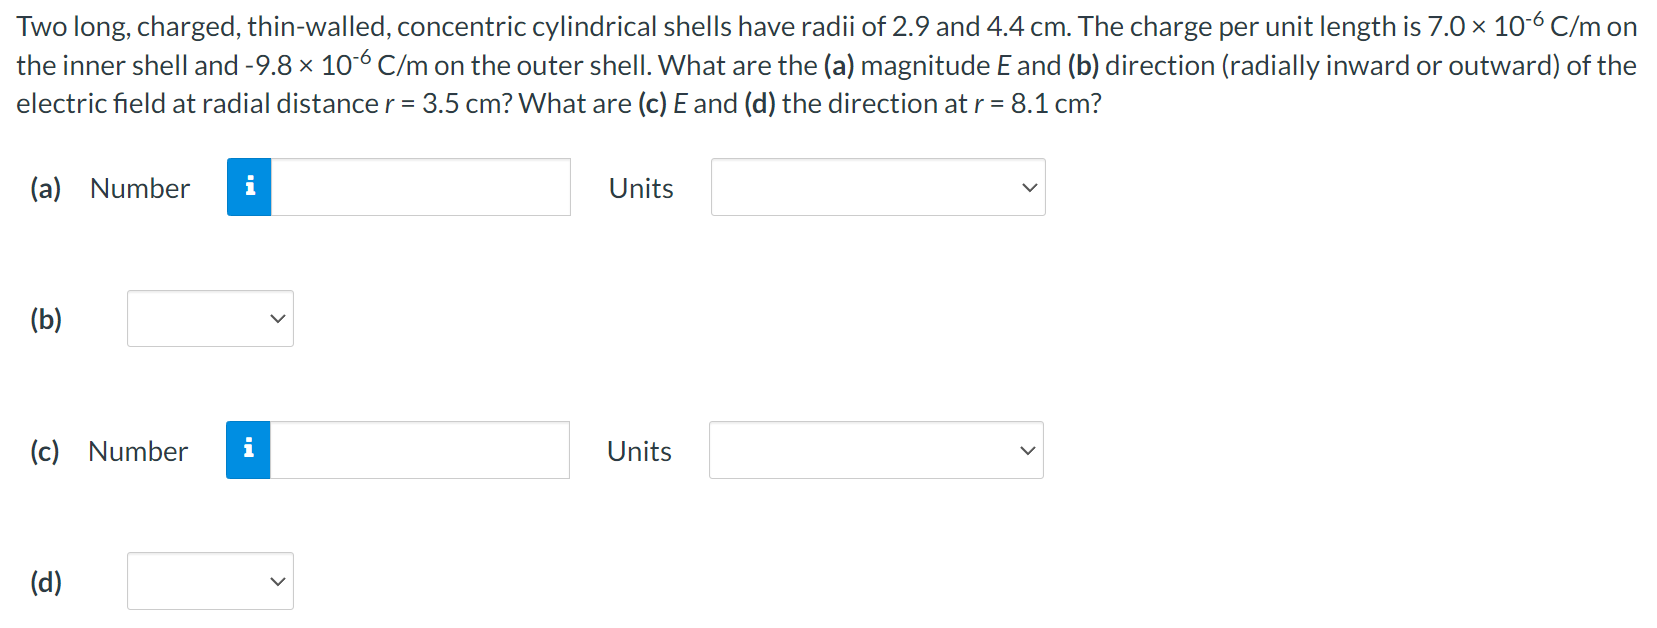 Two long, charged, thin-walled, concentric cylindrical shells have radii of 2.9 and 4.4 cm. The charge per unit length is 7.0×10−6 C/m on the inner shell and −9.8×10−6 C/m on the outer shell. What are the (a) magnitude E and (b) direction (radially inward or outward) of the electric field at radial distance r = 3.5 cm? What are (c) E and (d) the direction at r = 8.1 cm? (a) Number Units (b) (c) Number Units (d)